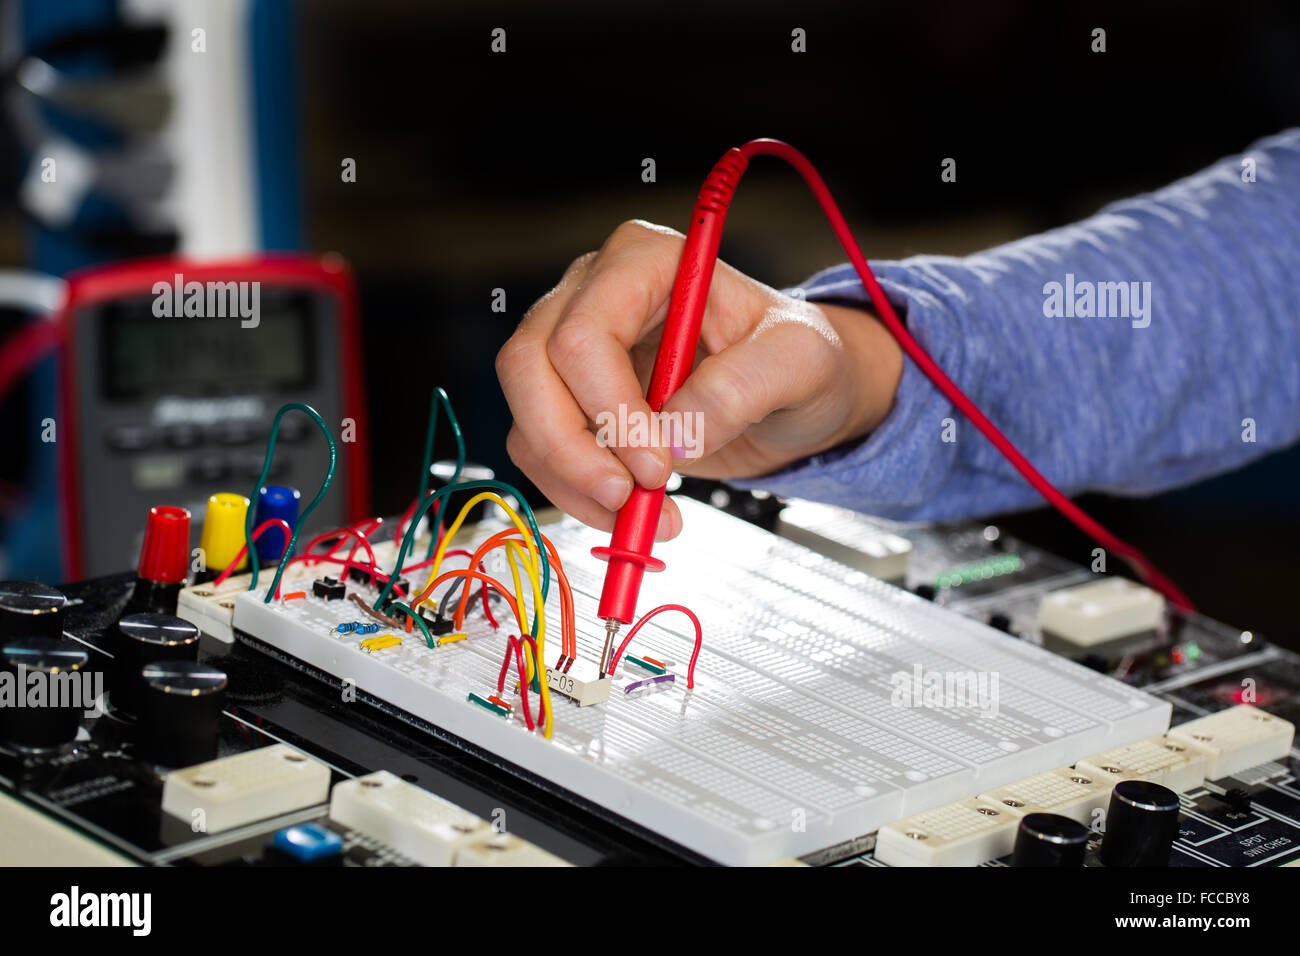 Information Technology. Wiring for servers and computers. Stock Photo